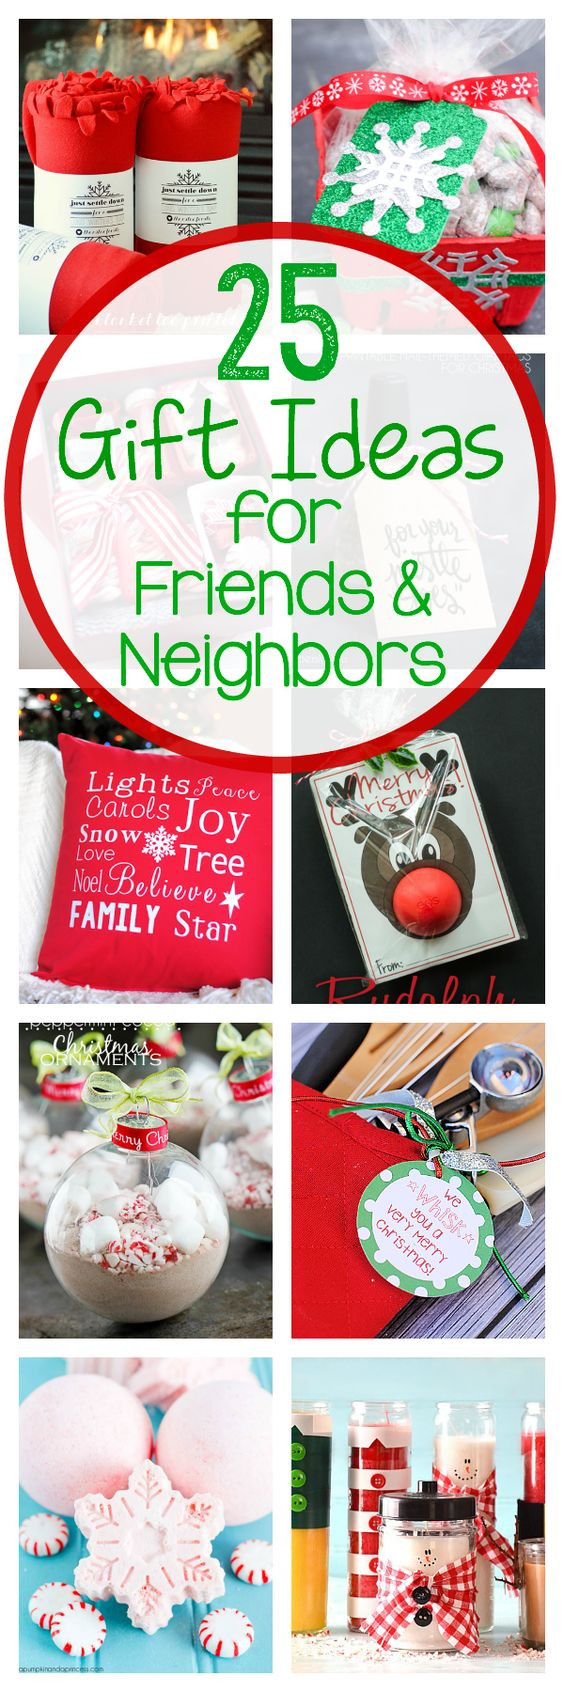 Christmas Gift Ideas For Friends
 25 Gift Ideas for Friends & Neighbors